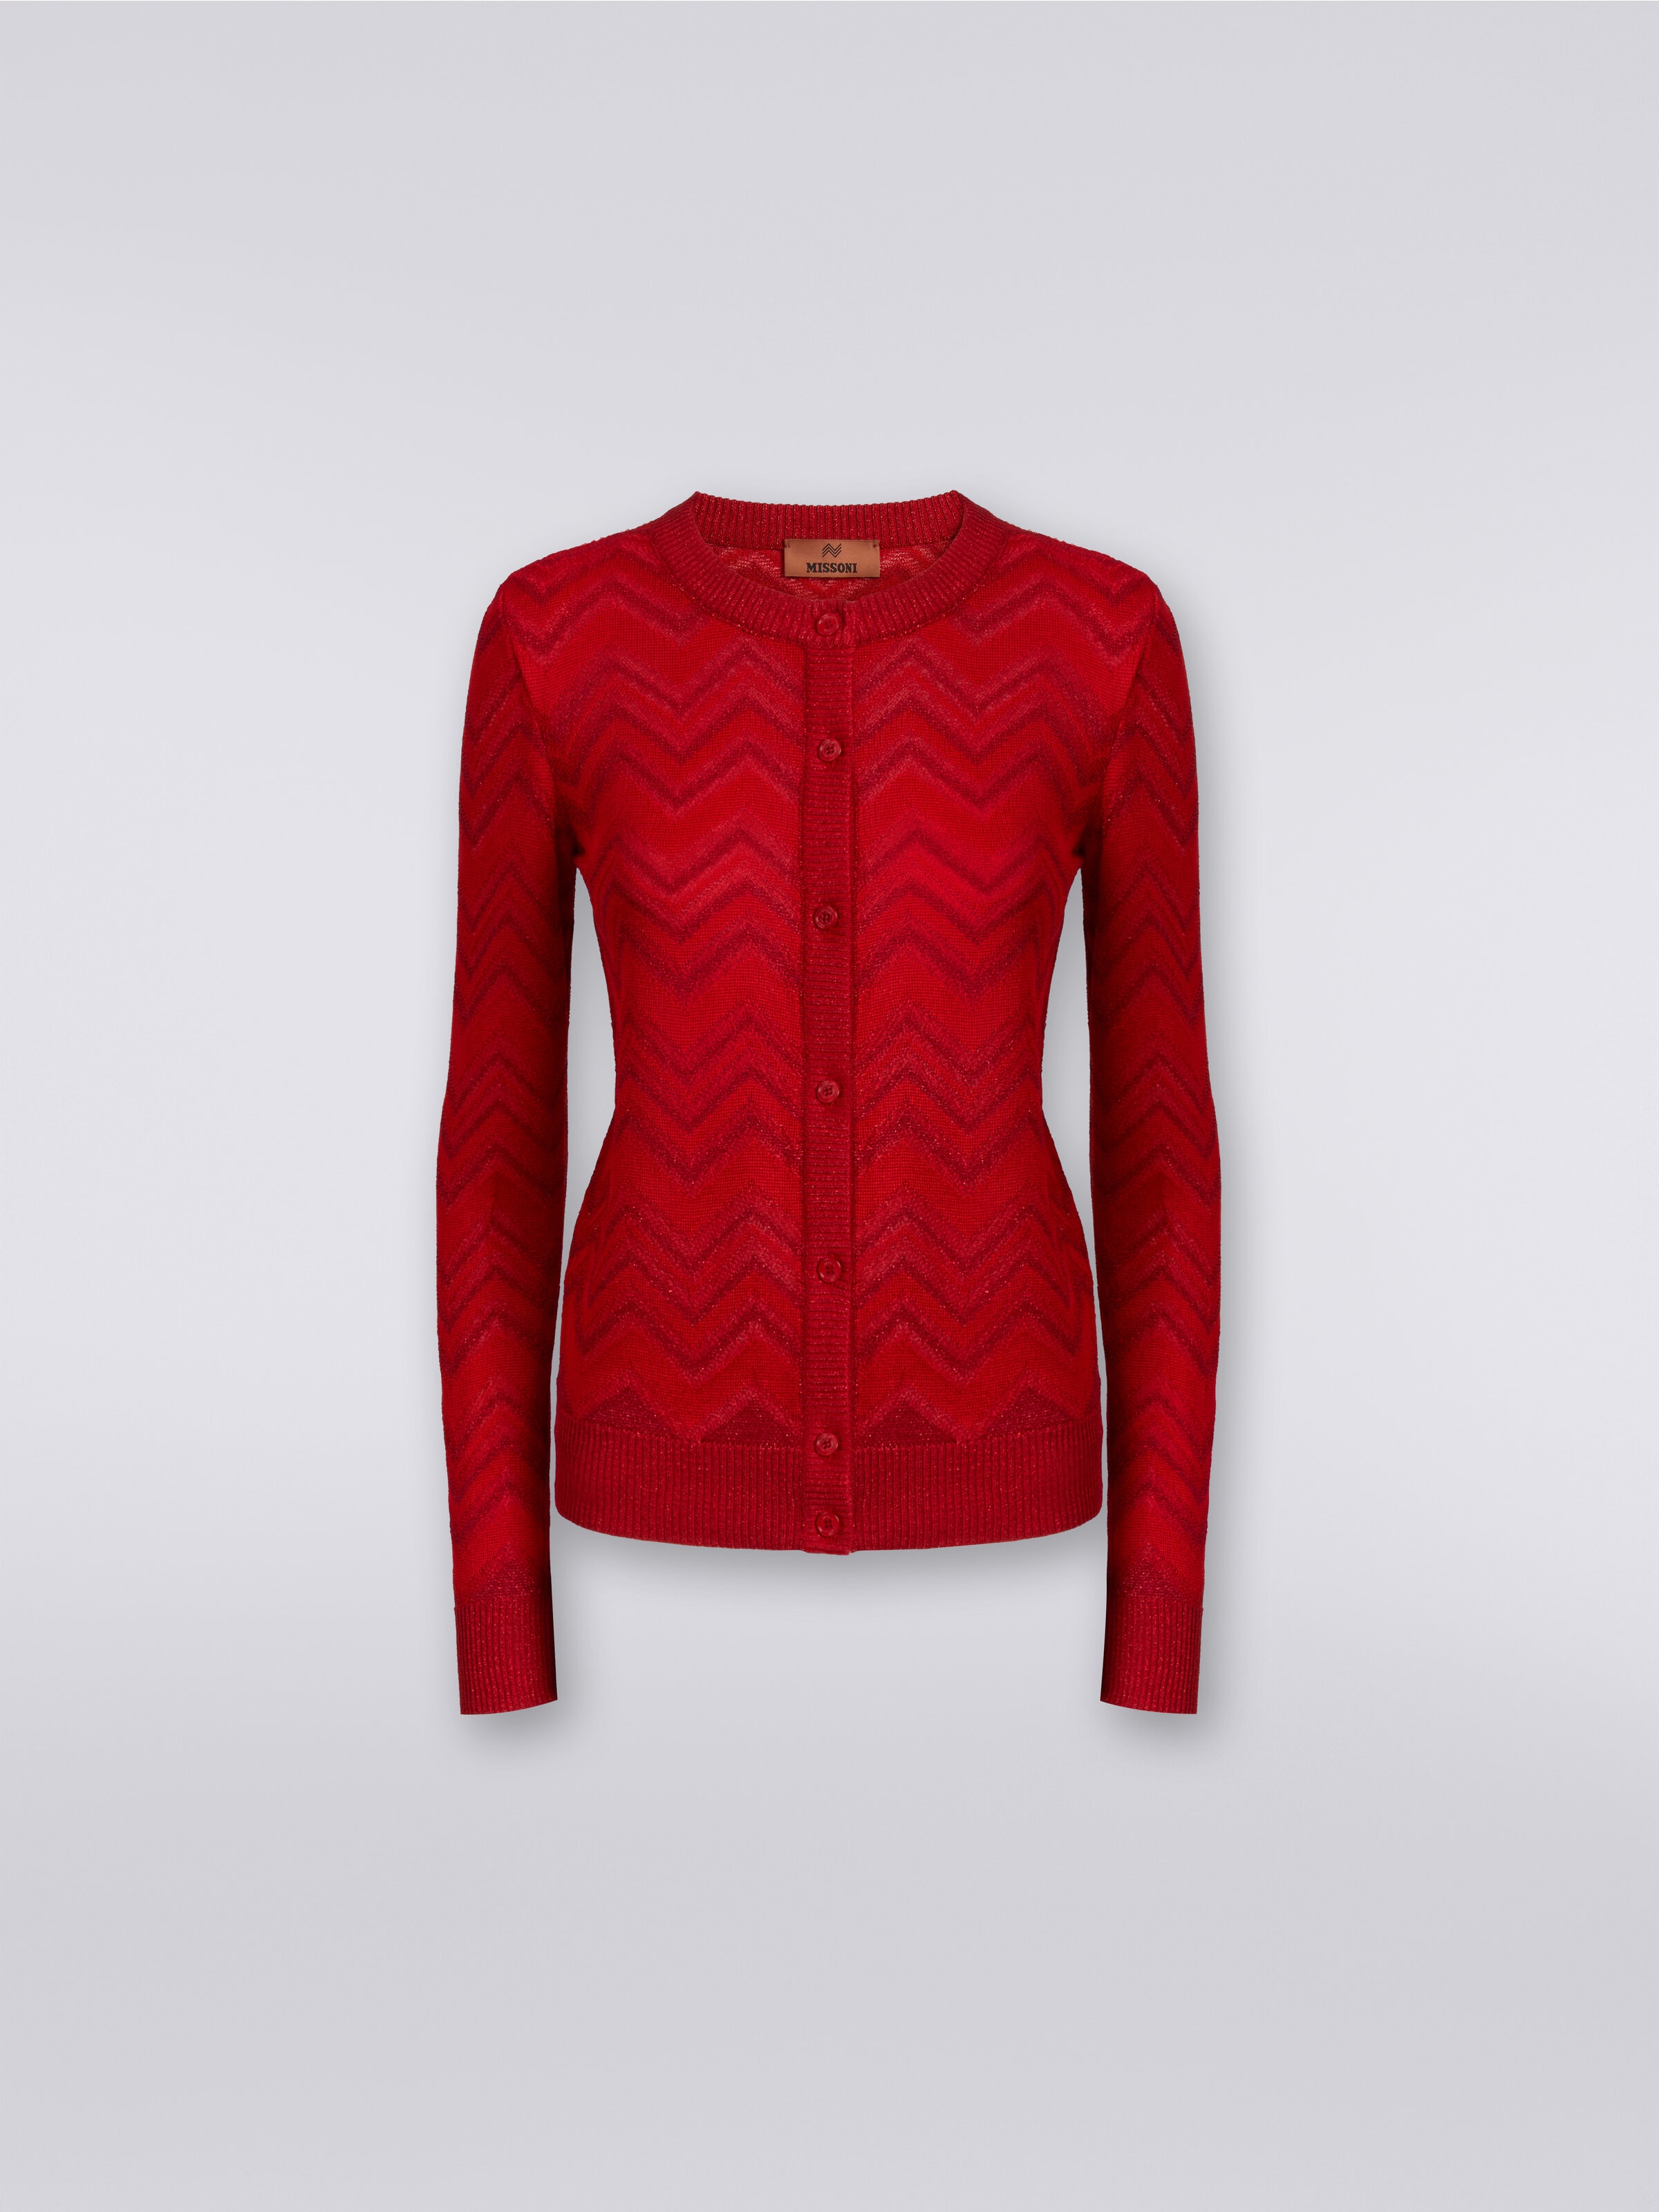 Cardigan in tonal zigzag knit with lurex, Red  - 0